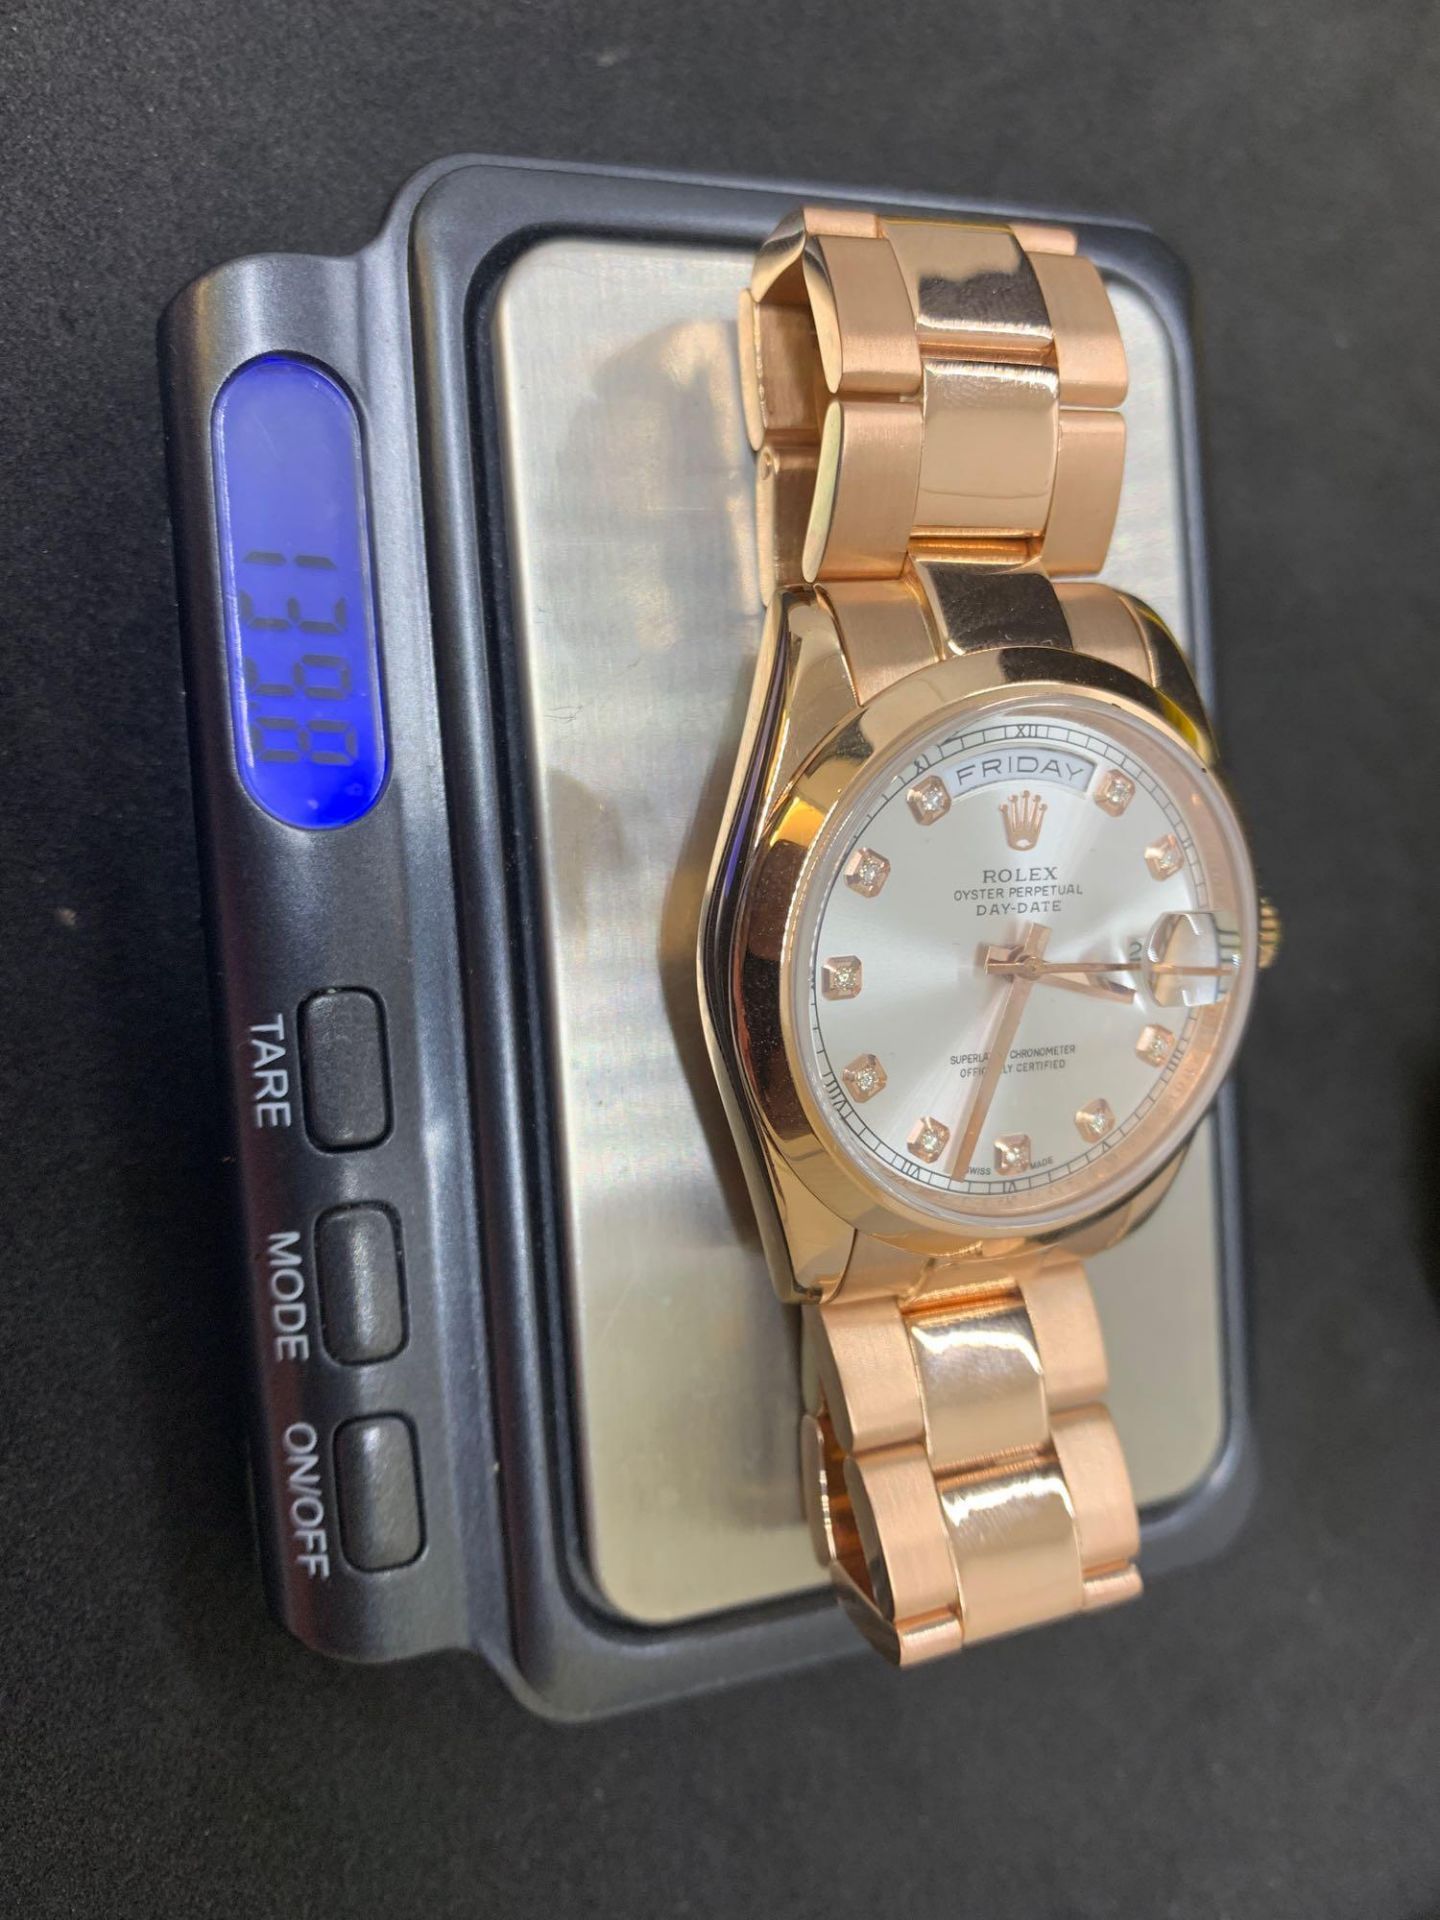 Solid 18ct rose gold watch Marked Rolex fitted with genuine Rolex movement - Image 16 of 18